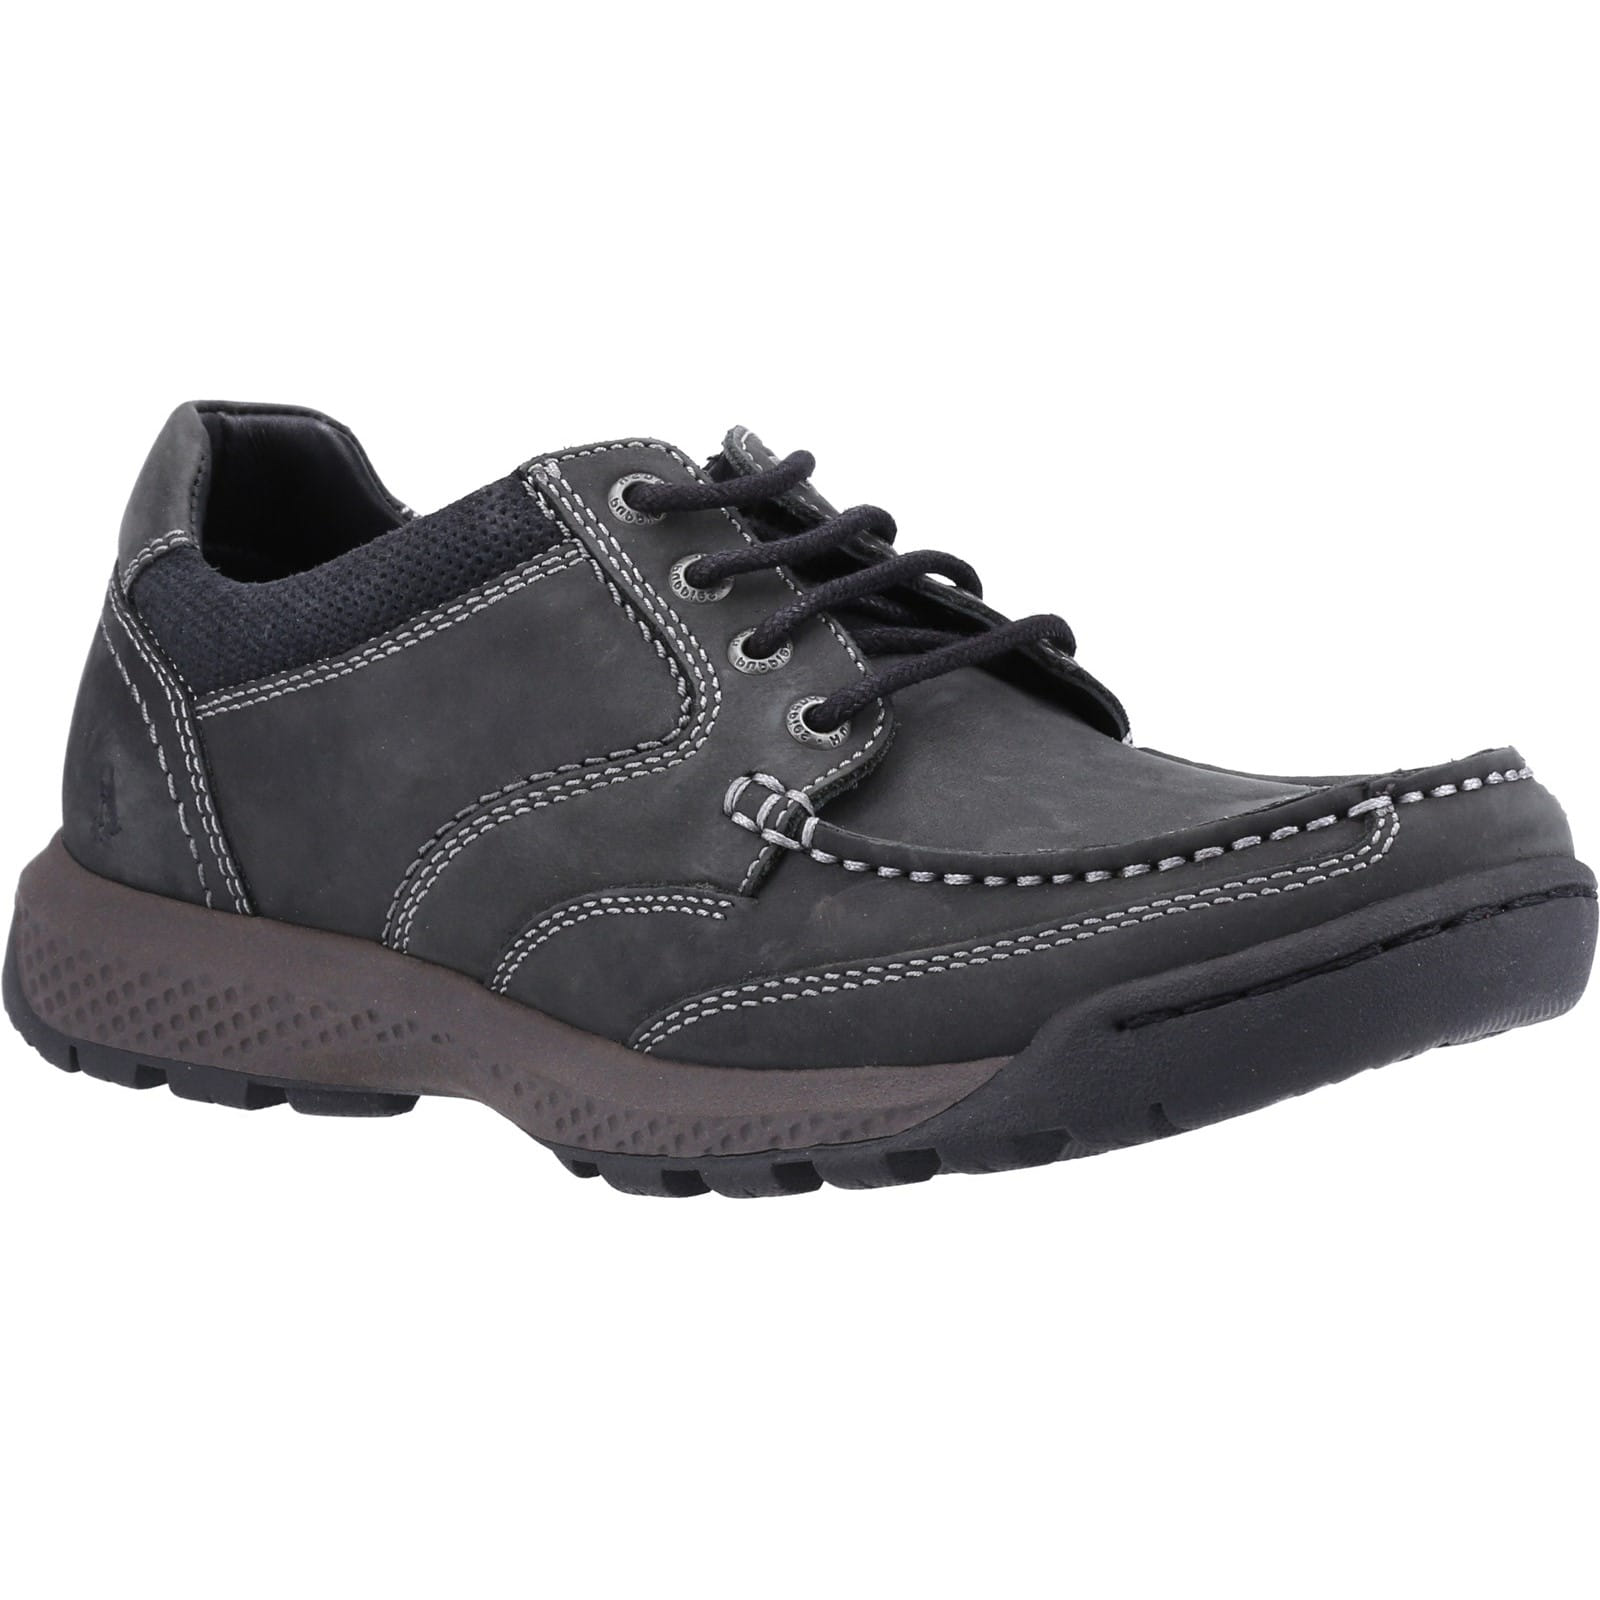 Hush Puppies Men's Dominic Lace Up Leather Shoes - UK 10